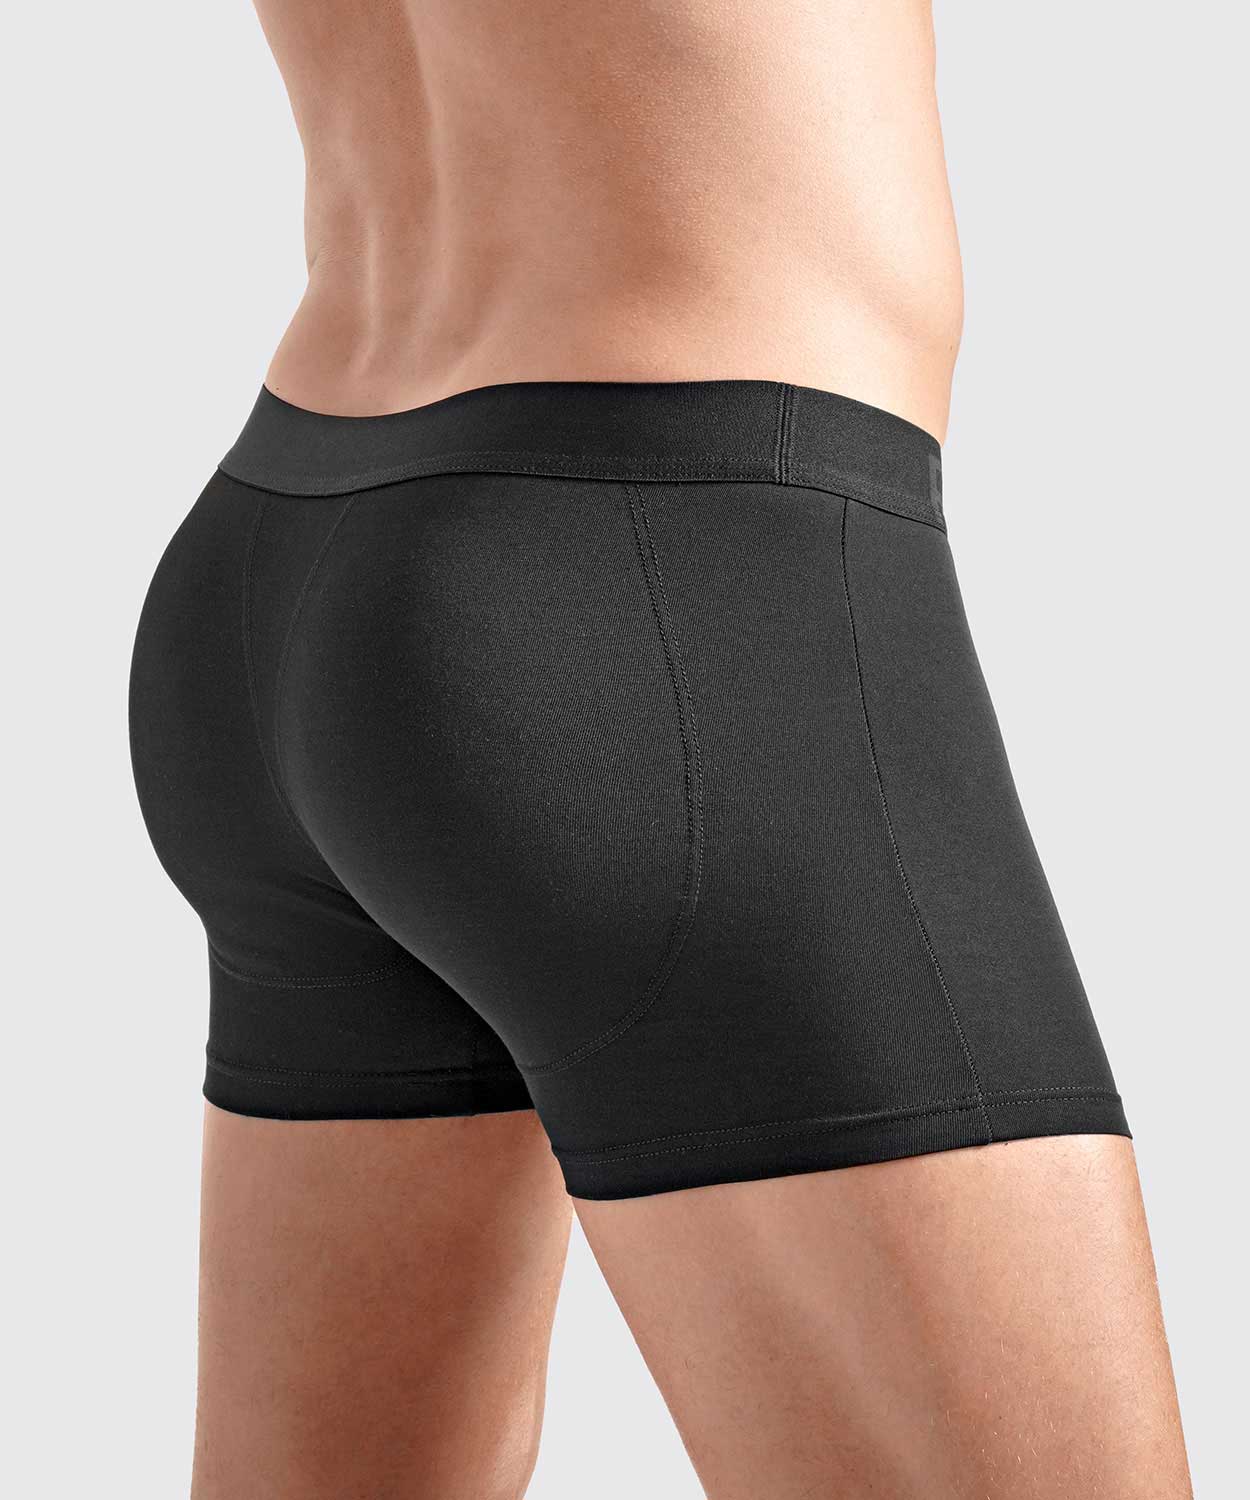 Padded Boxer Brief Modal